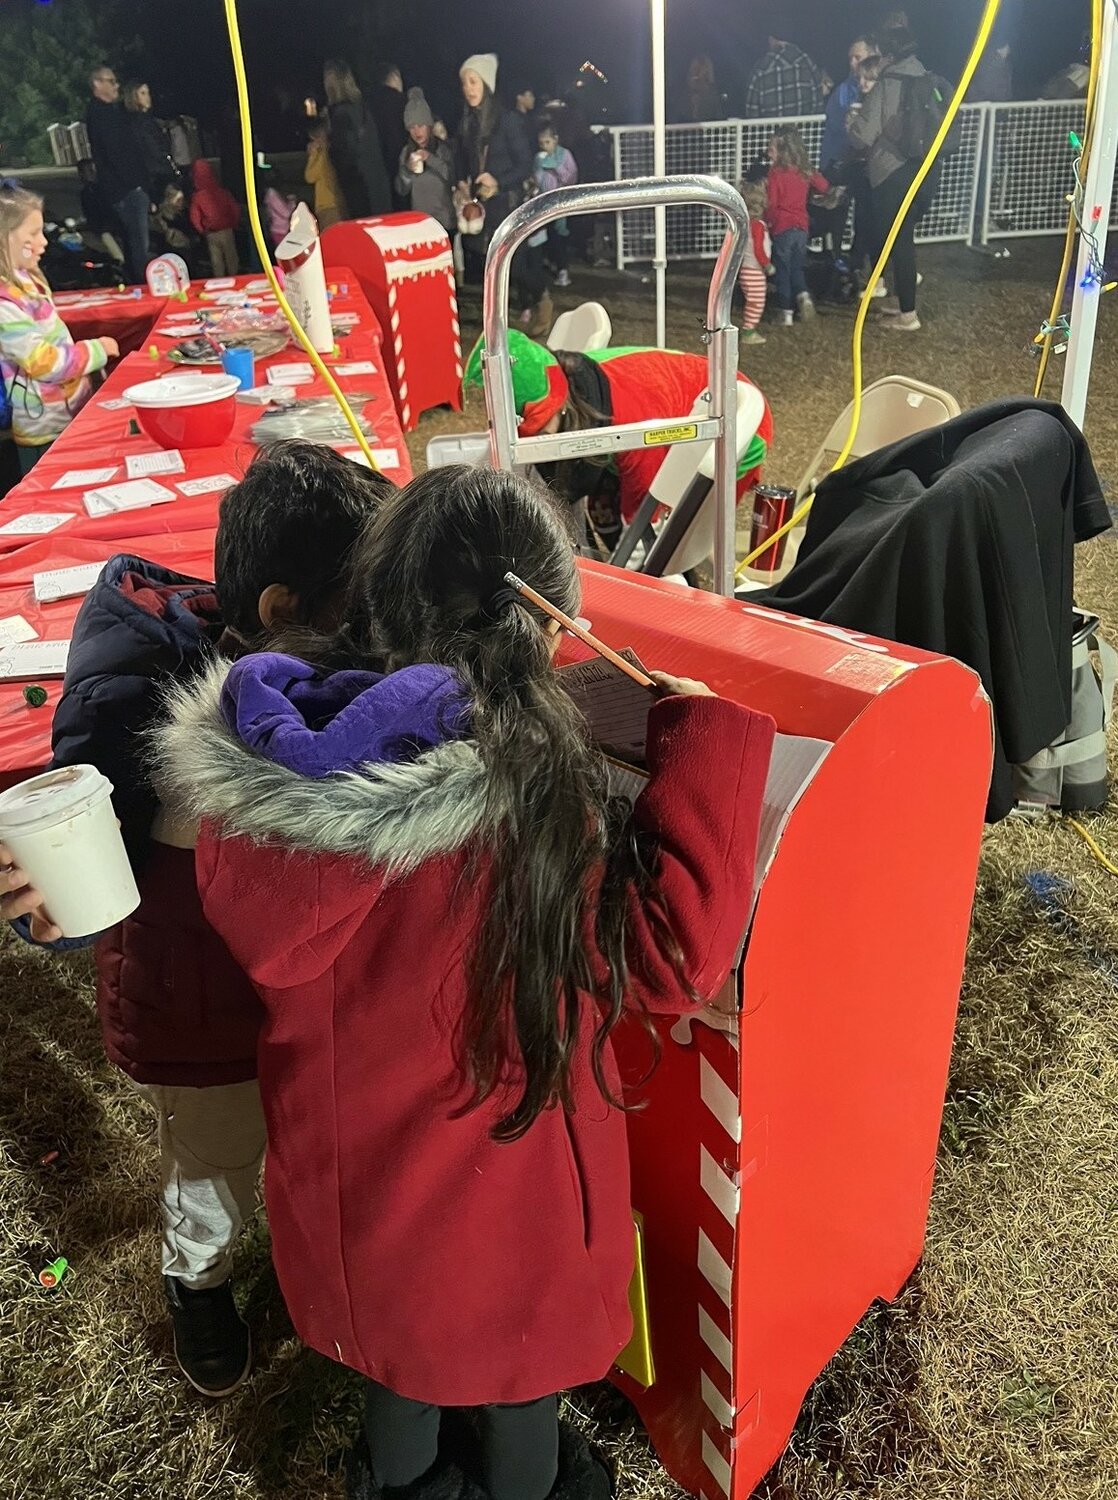 The author's children slide a letter to Santa Clause in the 'Letters to Santa' mailbox.